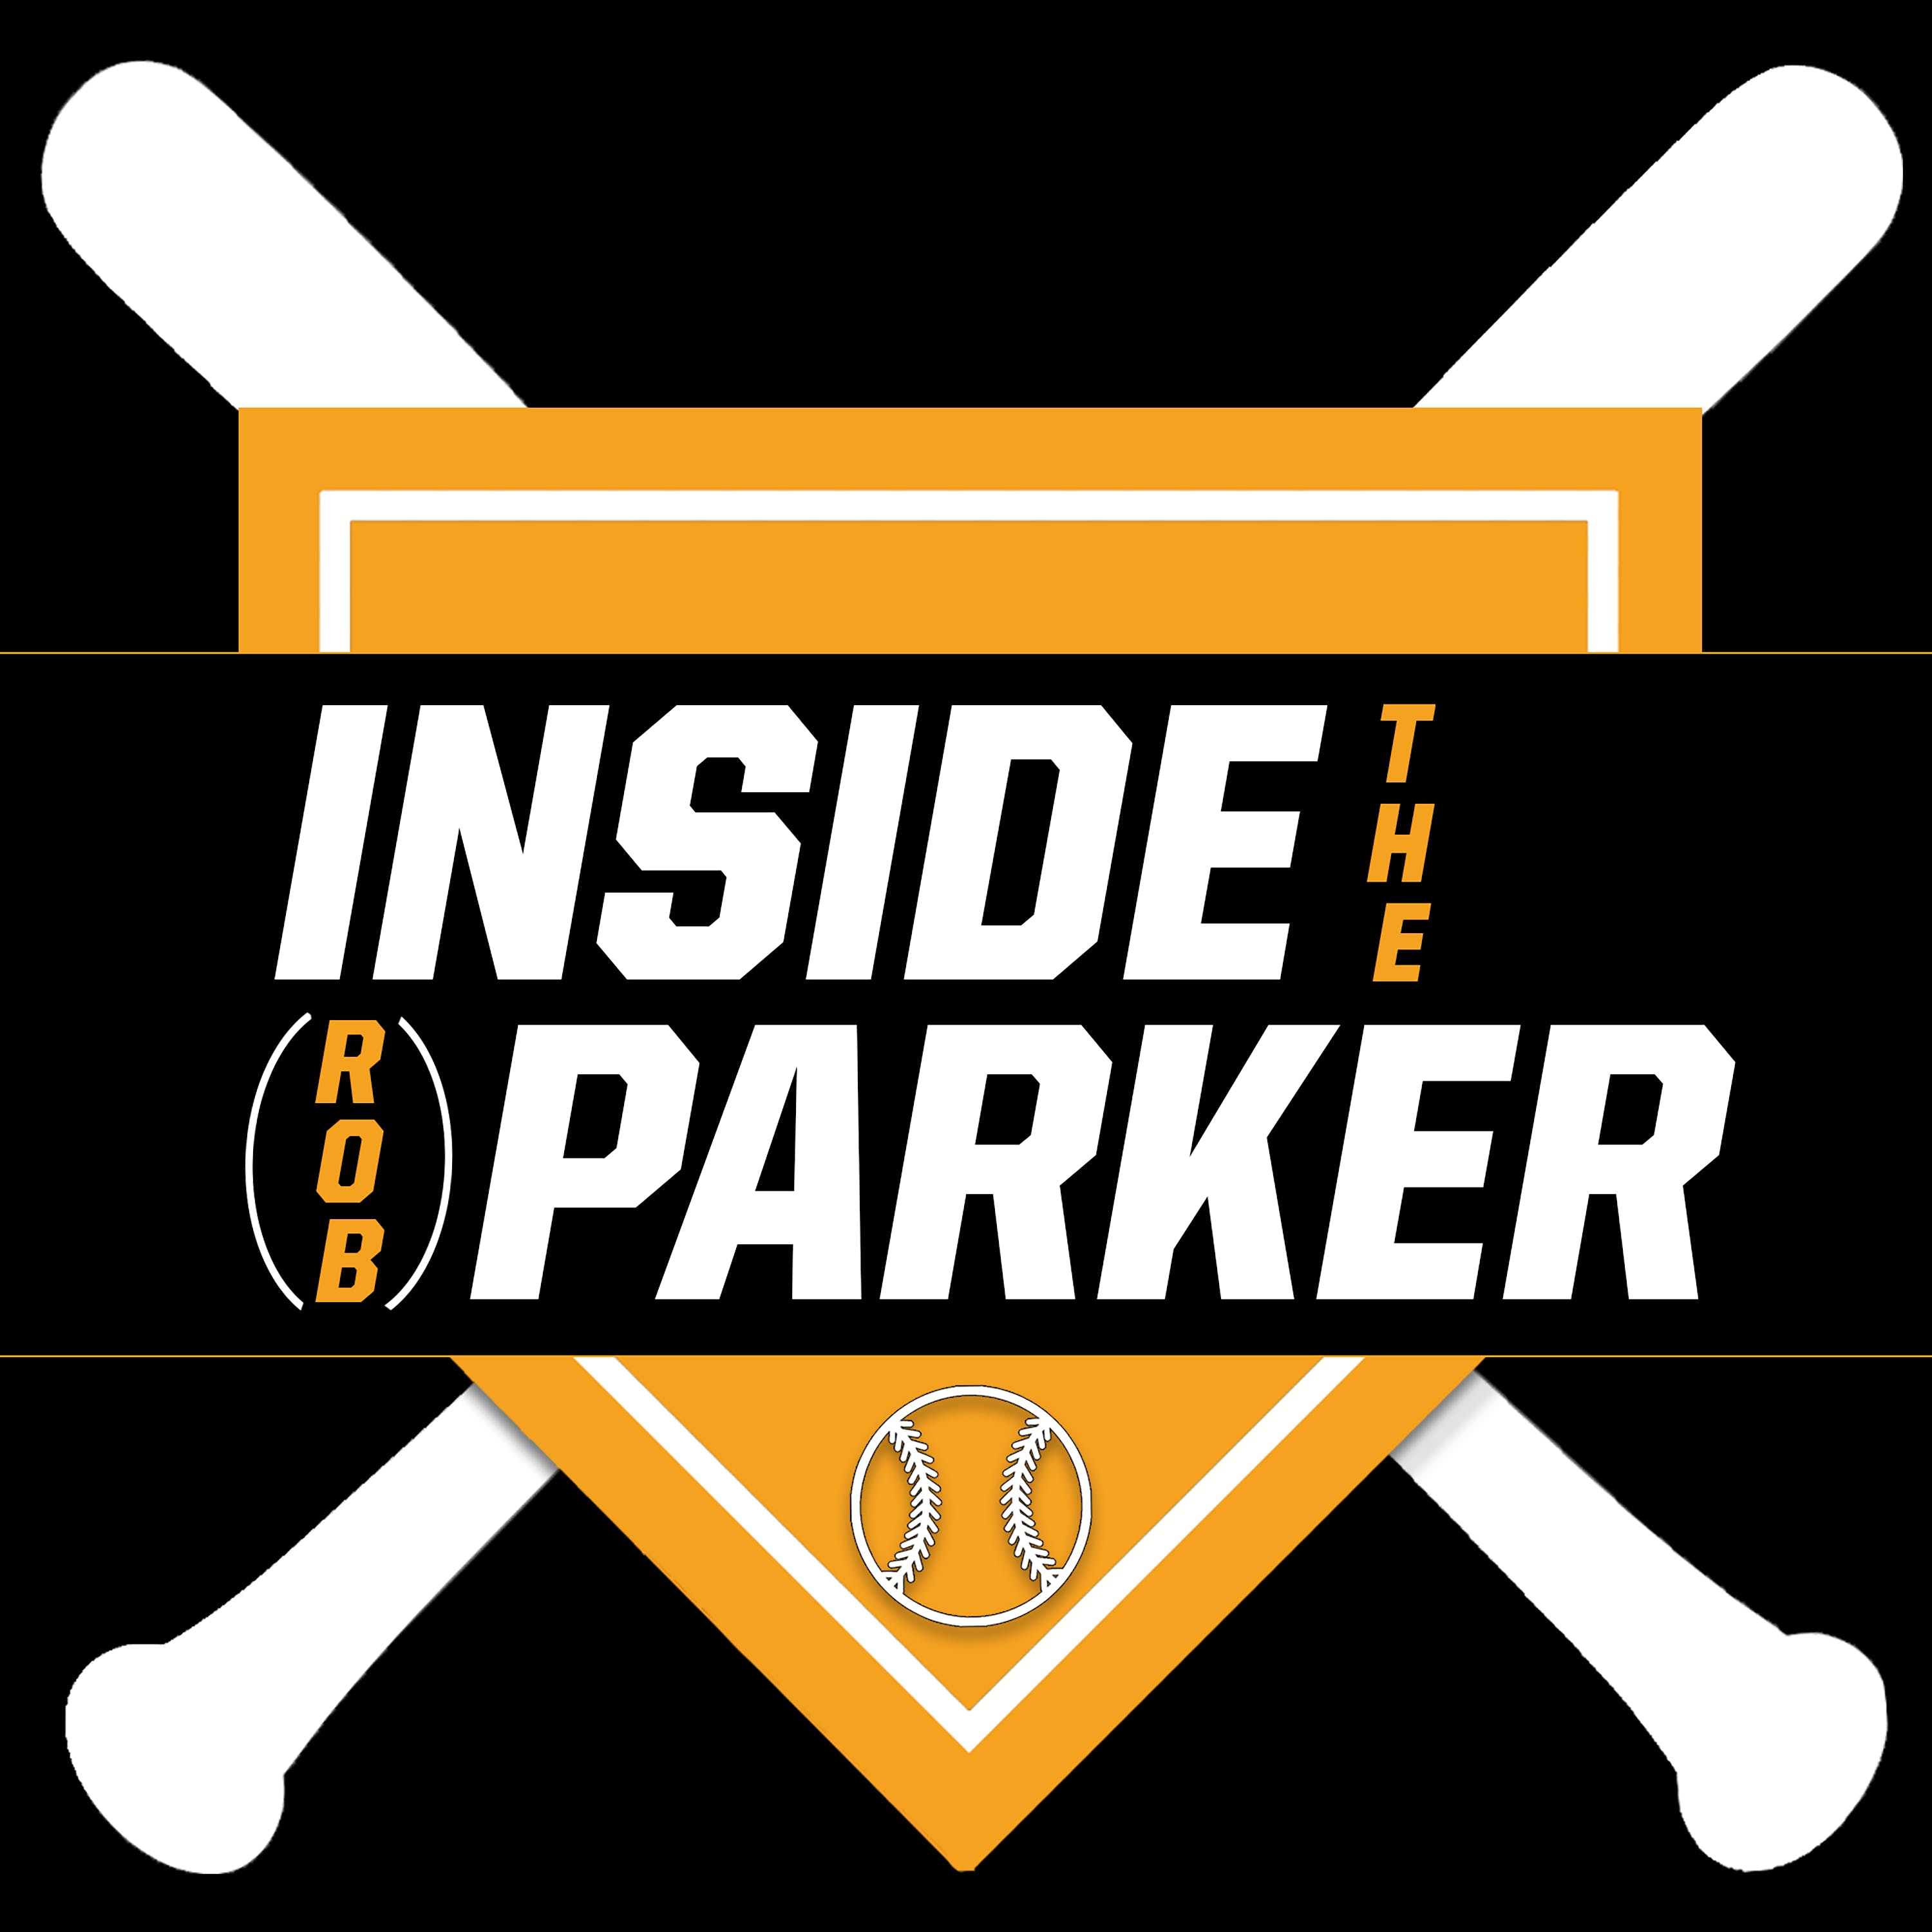 Inside the Parker: Aaron Judge's Close Call, Tatis Jr and Soto Struggling in San Diego + Former MLB All-Star Bip Roberts